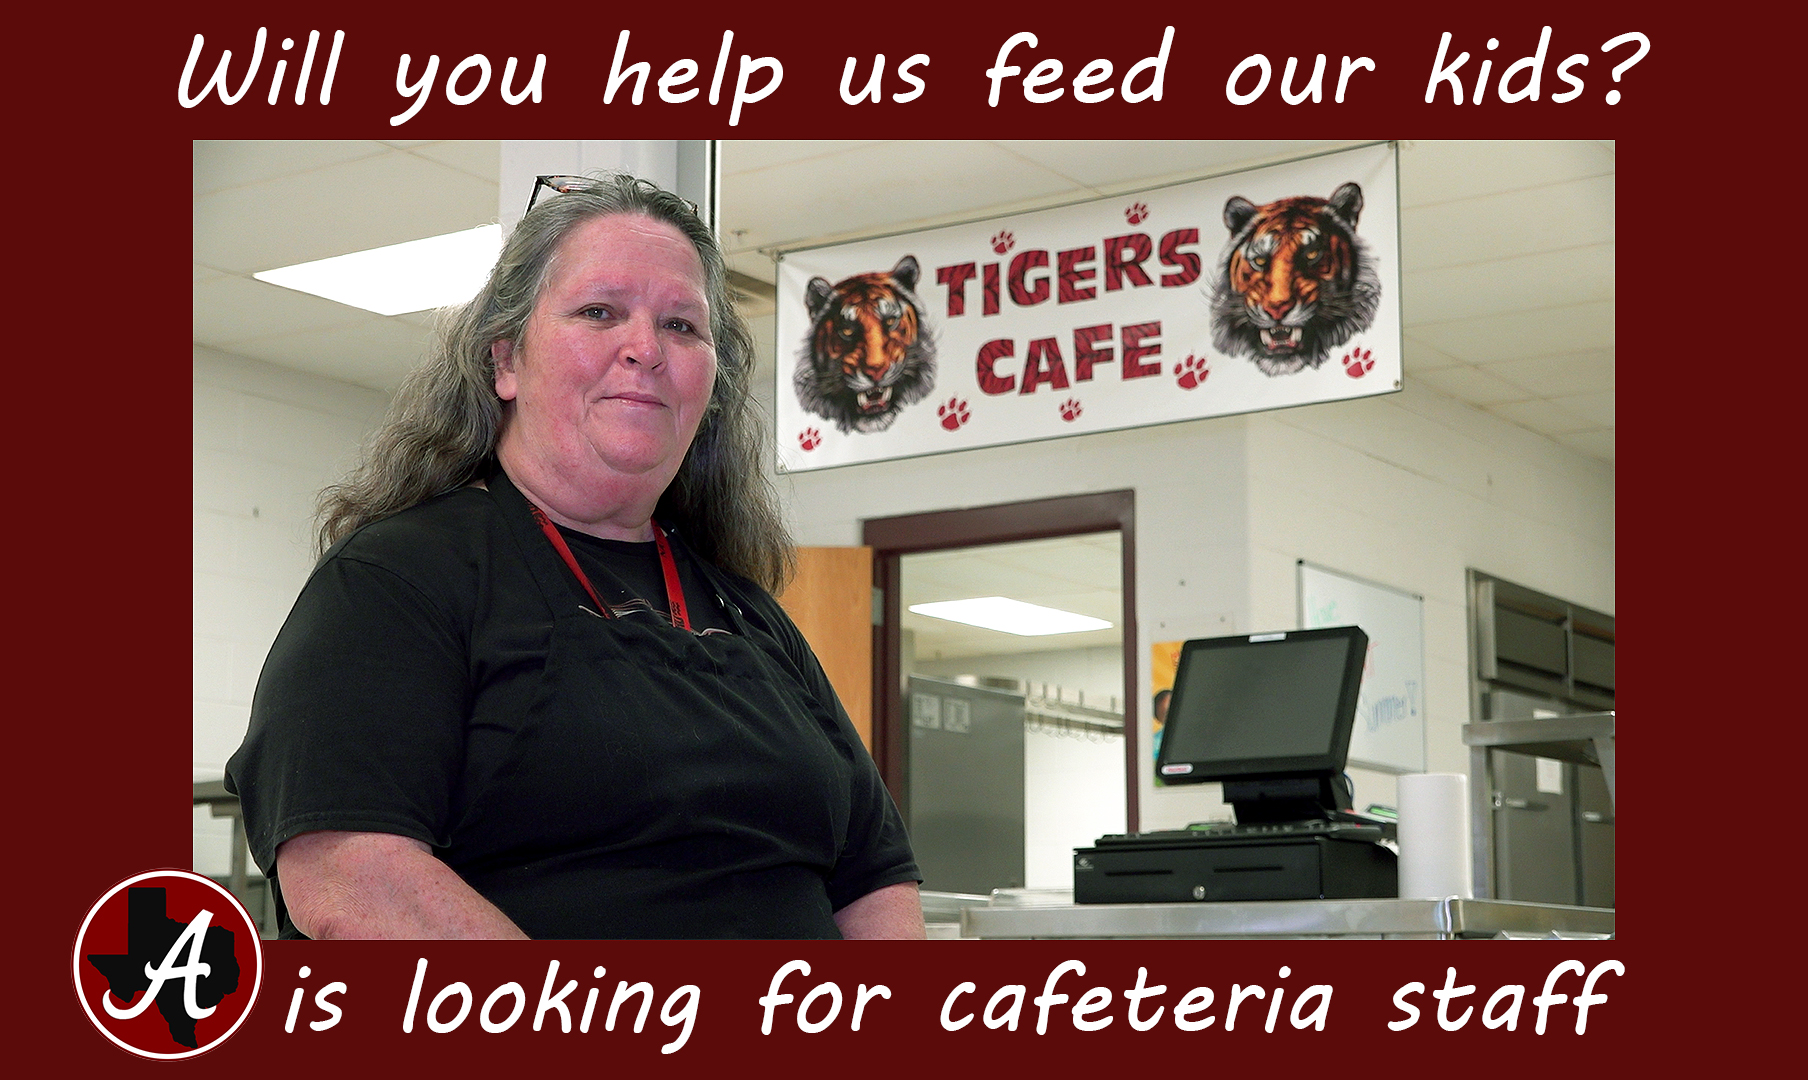 Cafeteria workers needed